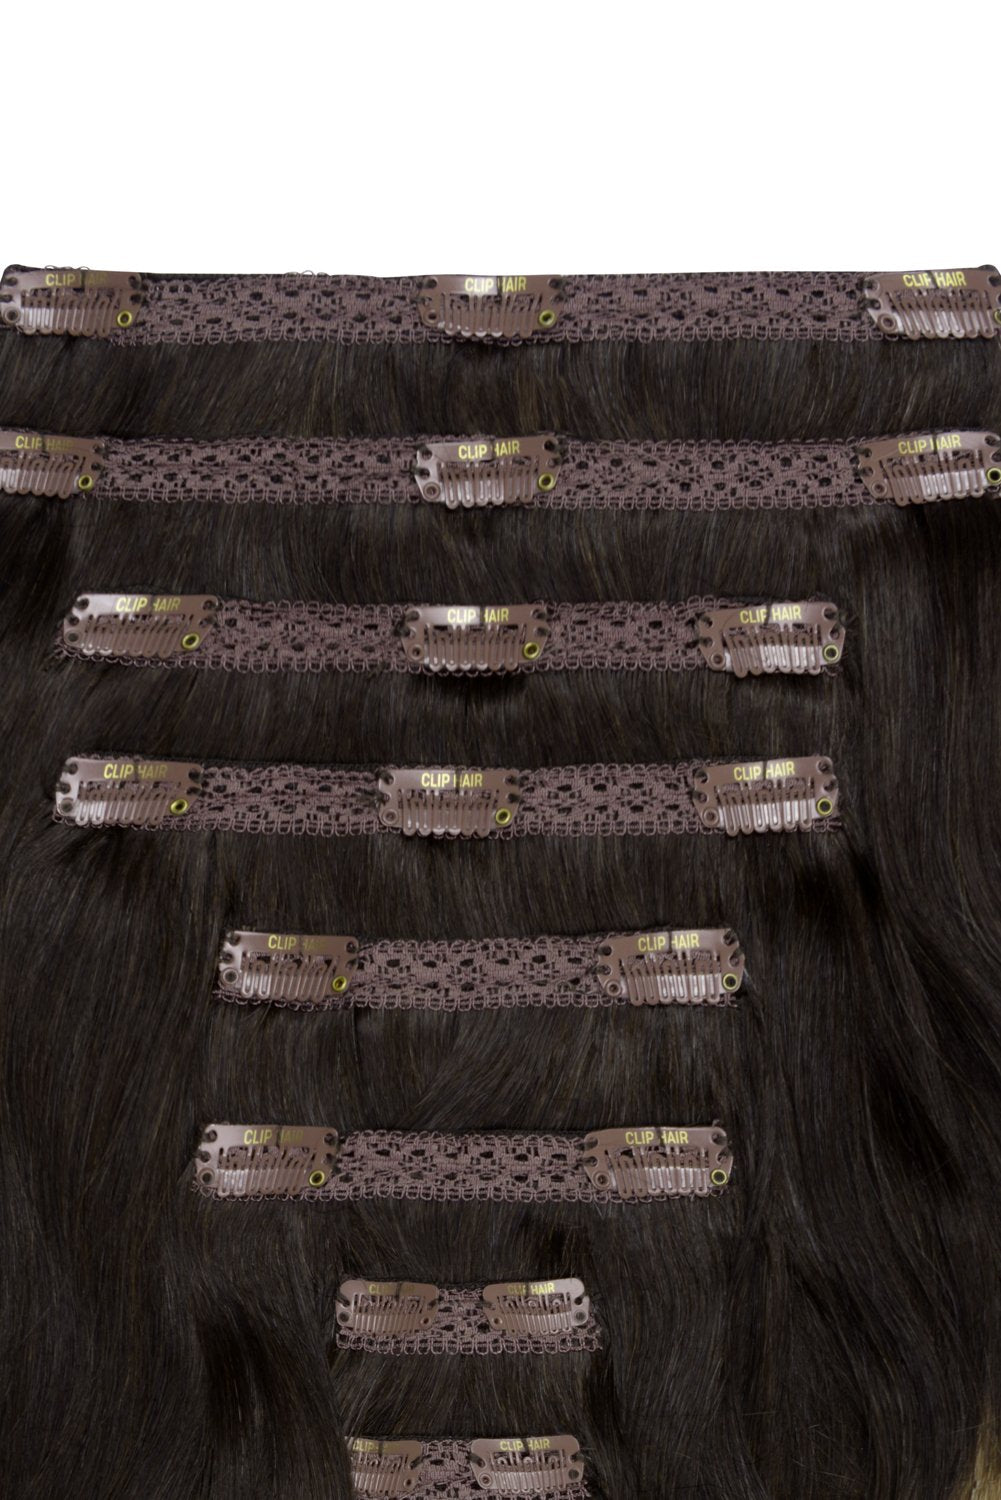 Double Wefted Full Head Remy Clip in Human Hair Extensions - Dark Brown/Silver Ombre (#T2/SG)